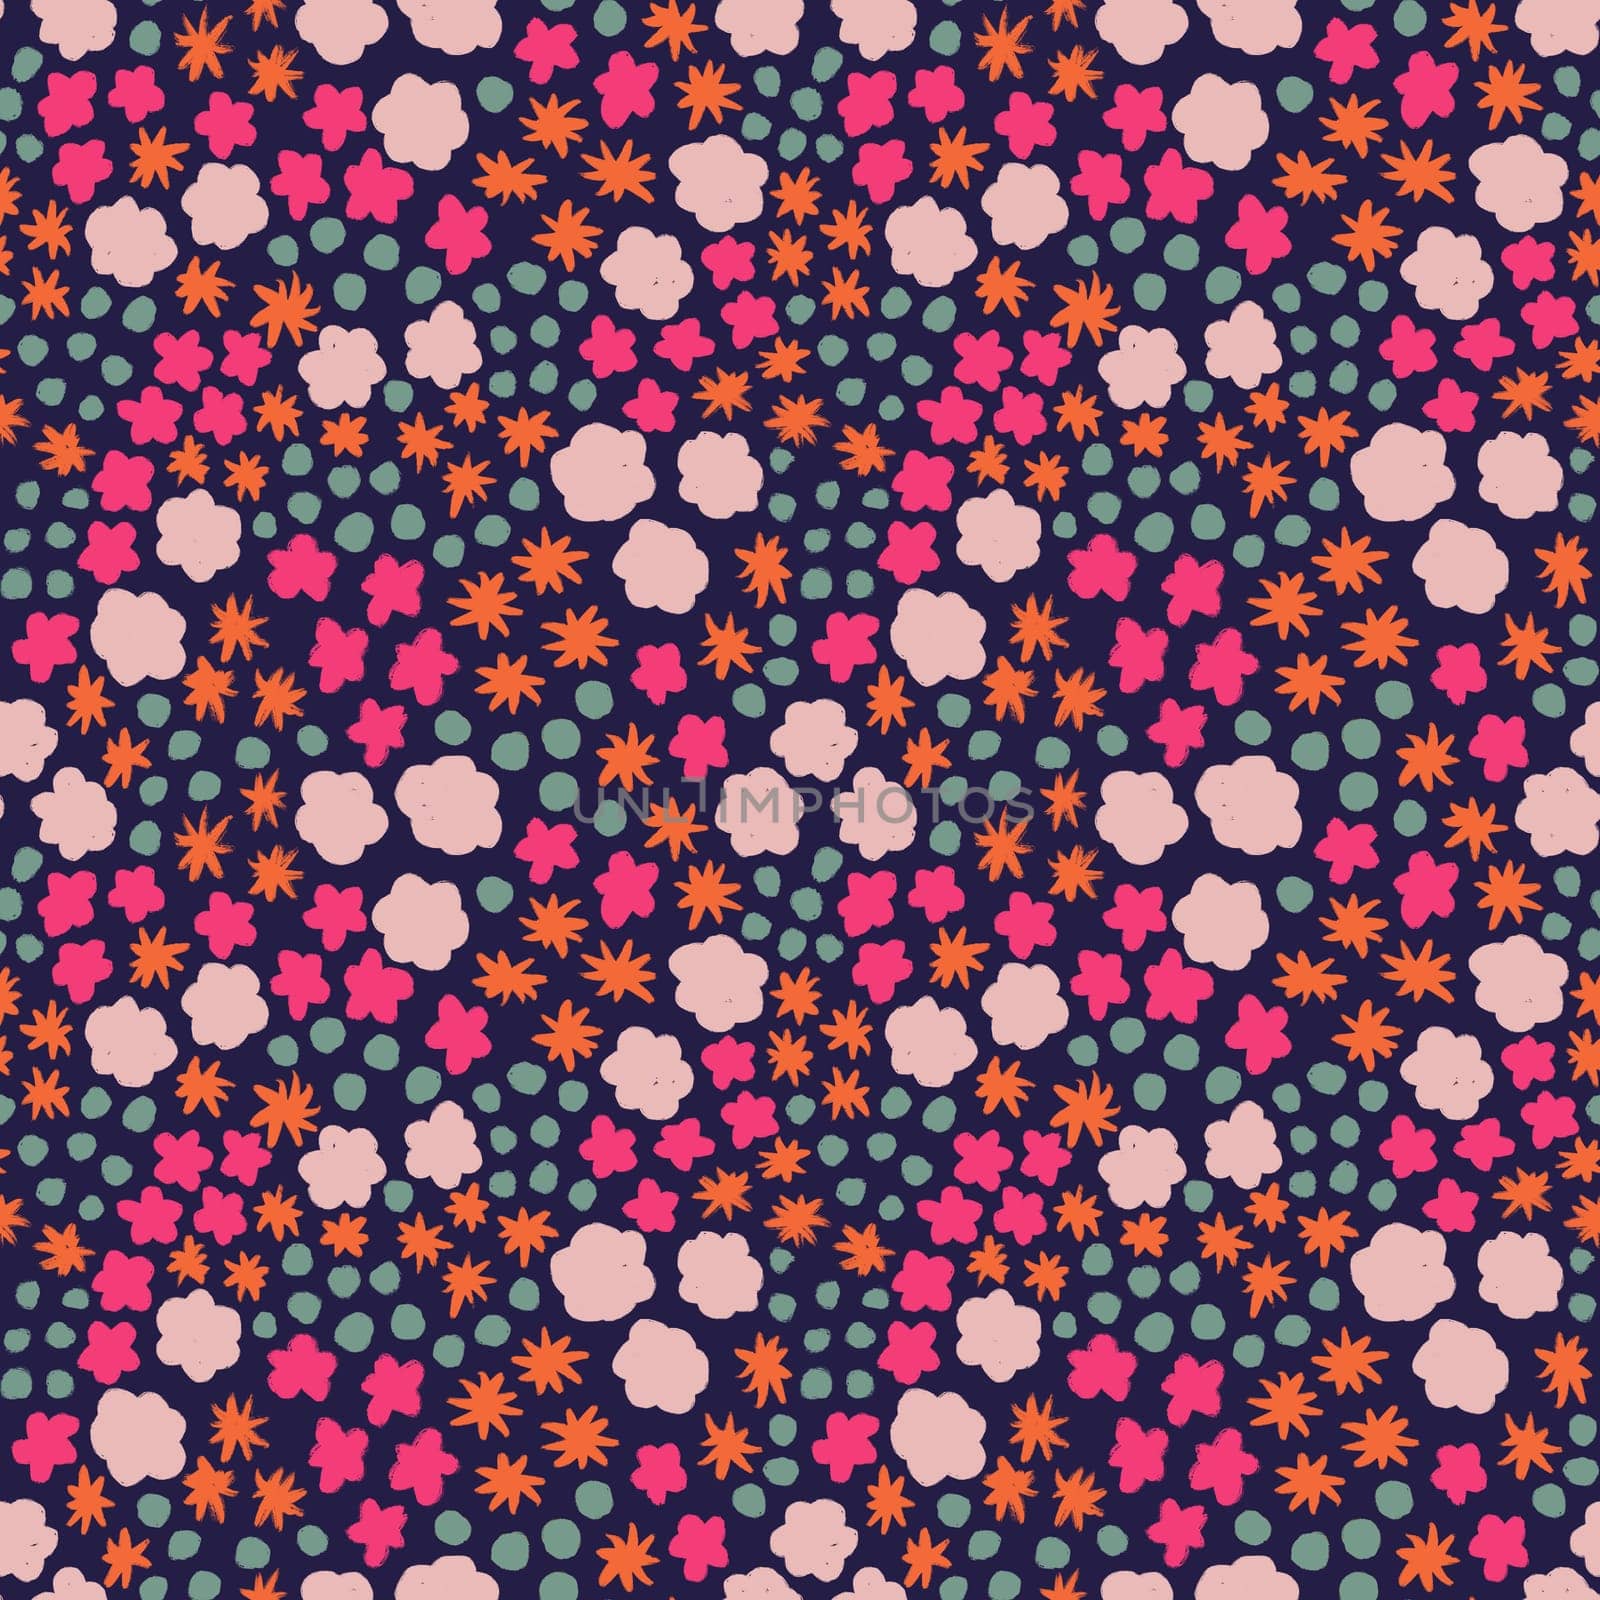 Hand drawn seamless pattern with pink turquoise flower floral elements, ditsy summer spring botanical nature print, bloom blossom stylized petals. Retro vintage fabric design, cute dots nature meadow. by Lagmar